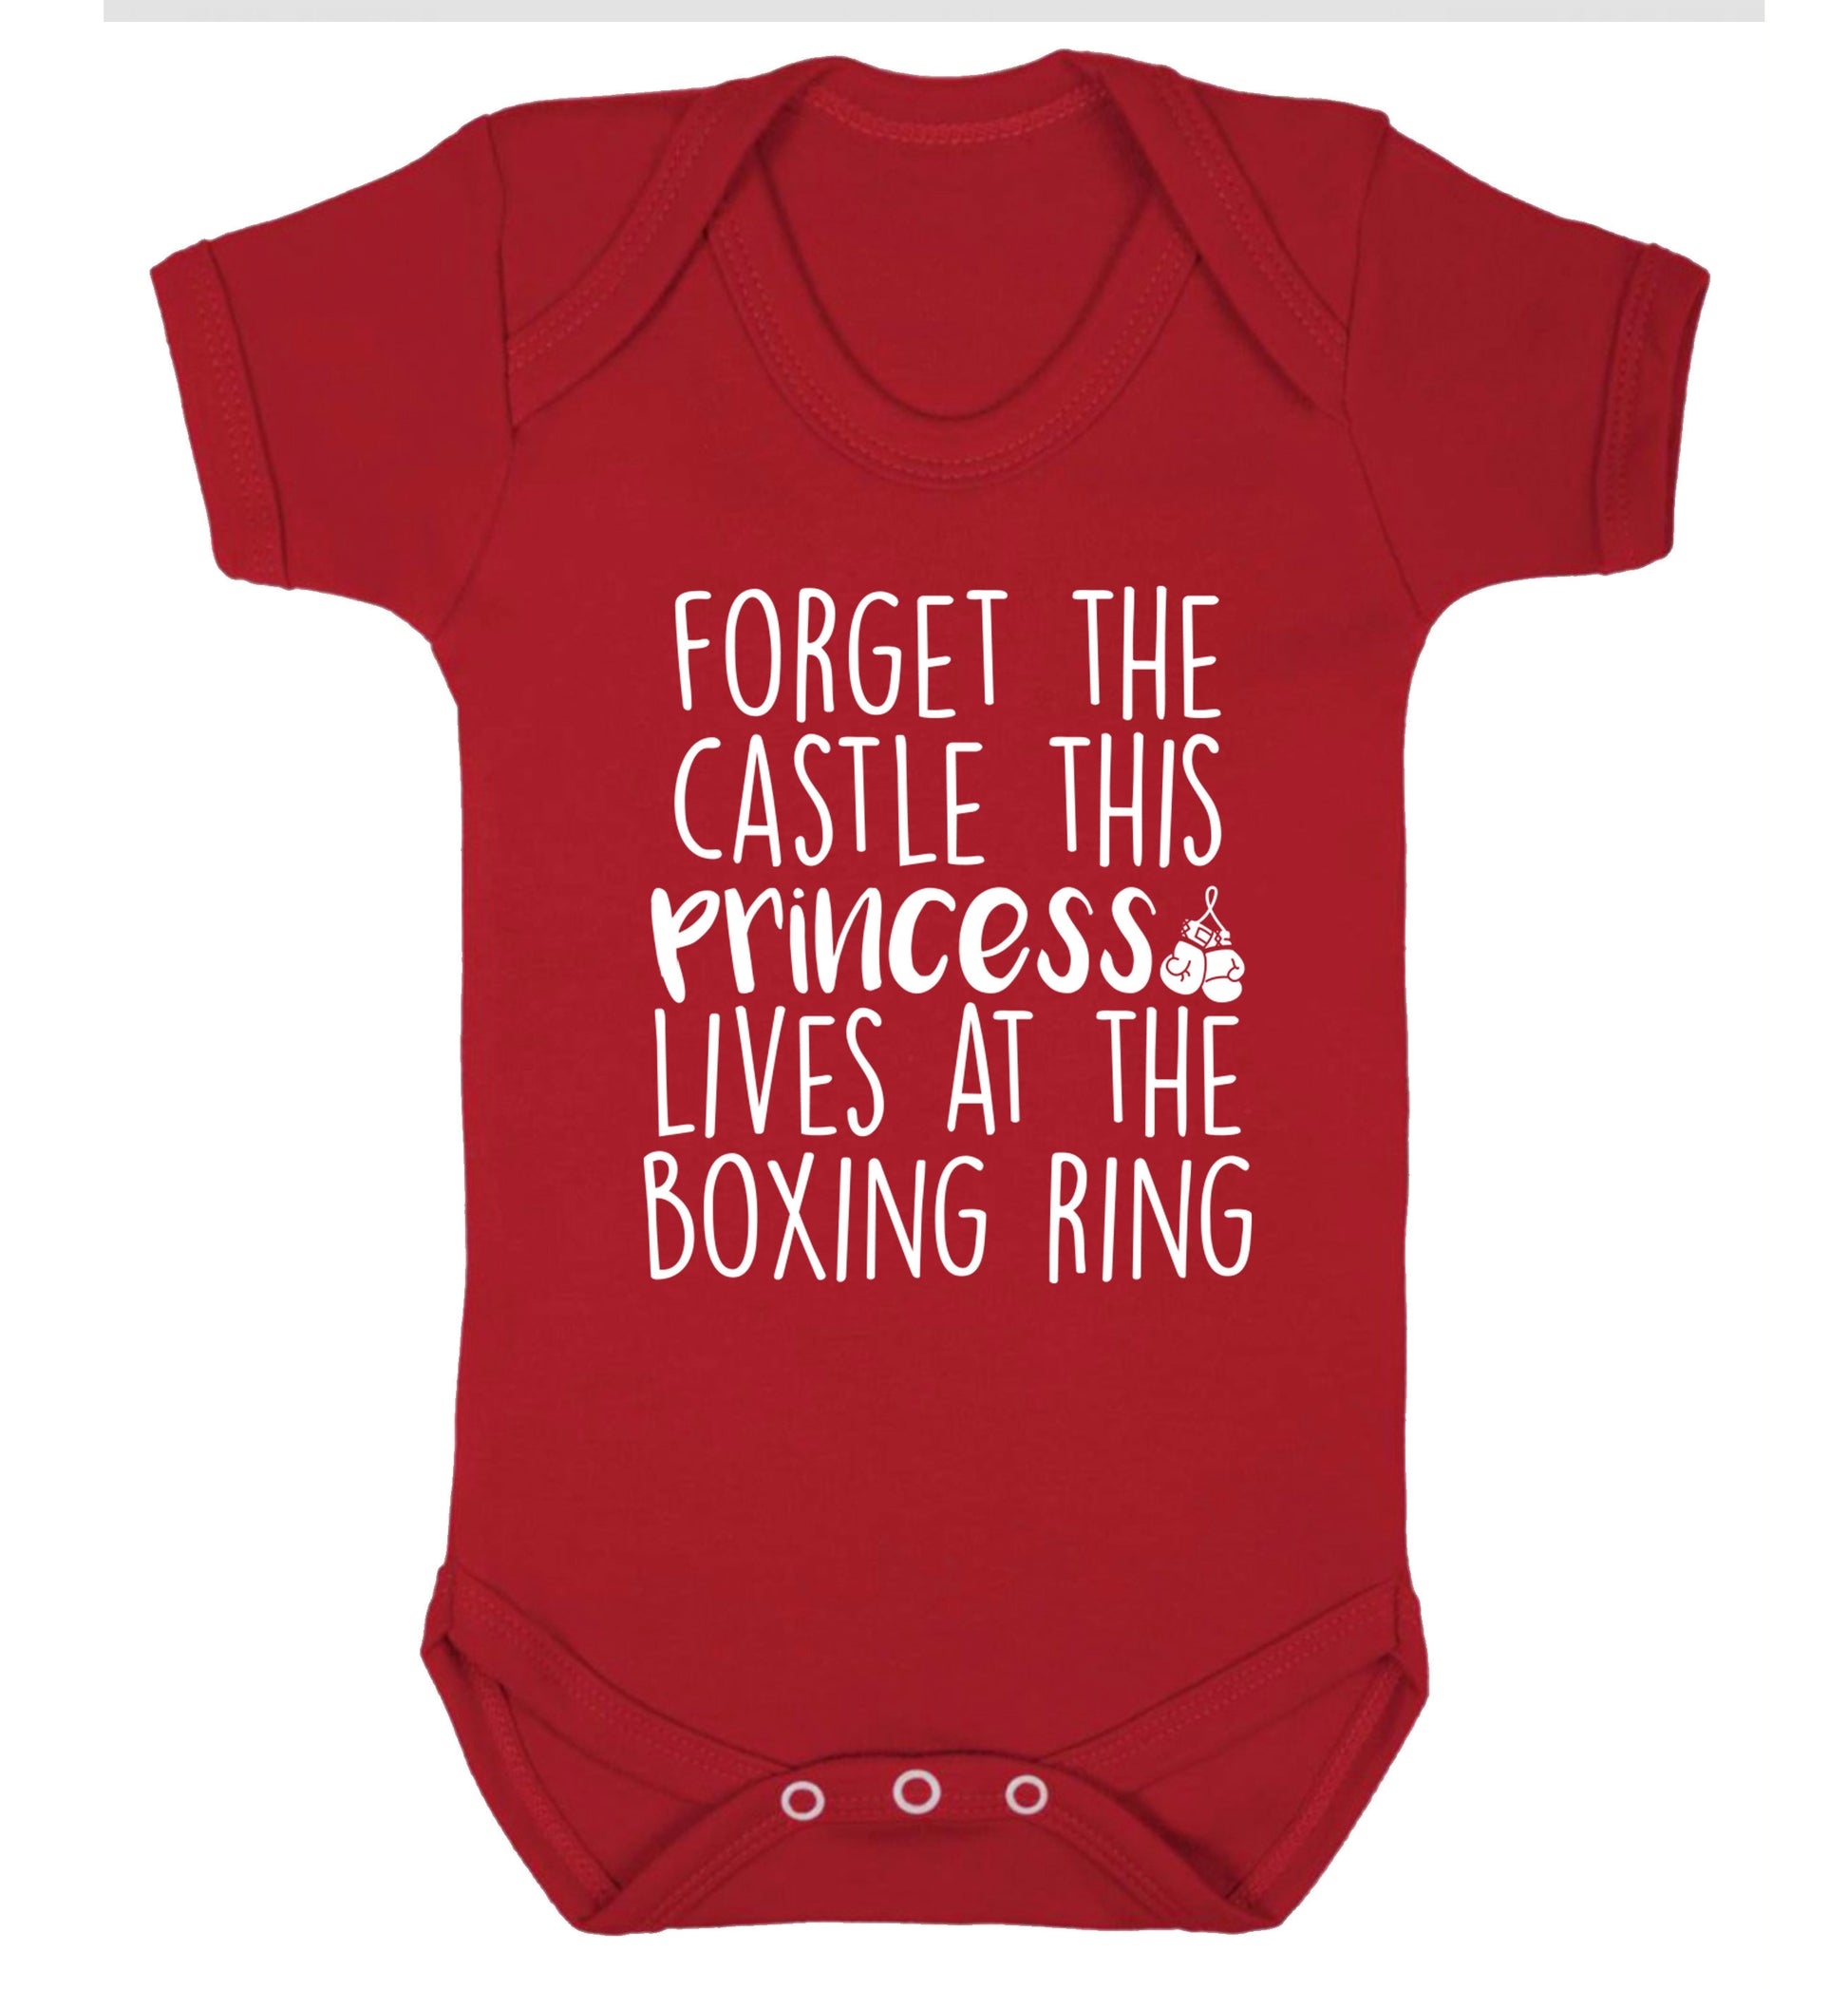 Forget the castle this princess lives at the boxing ring Baby Vest red 18-24 months